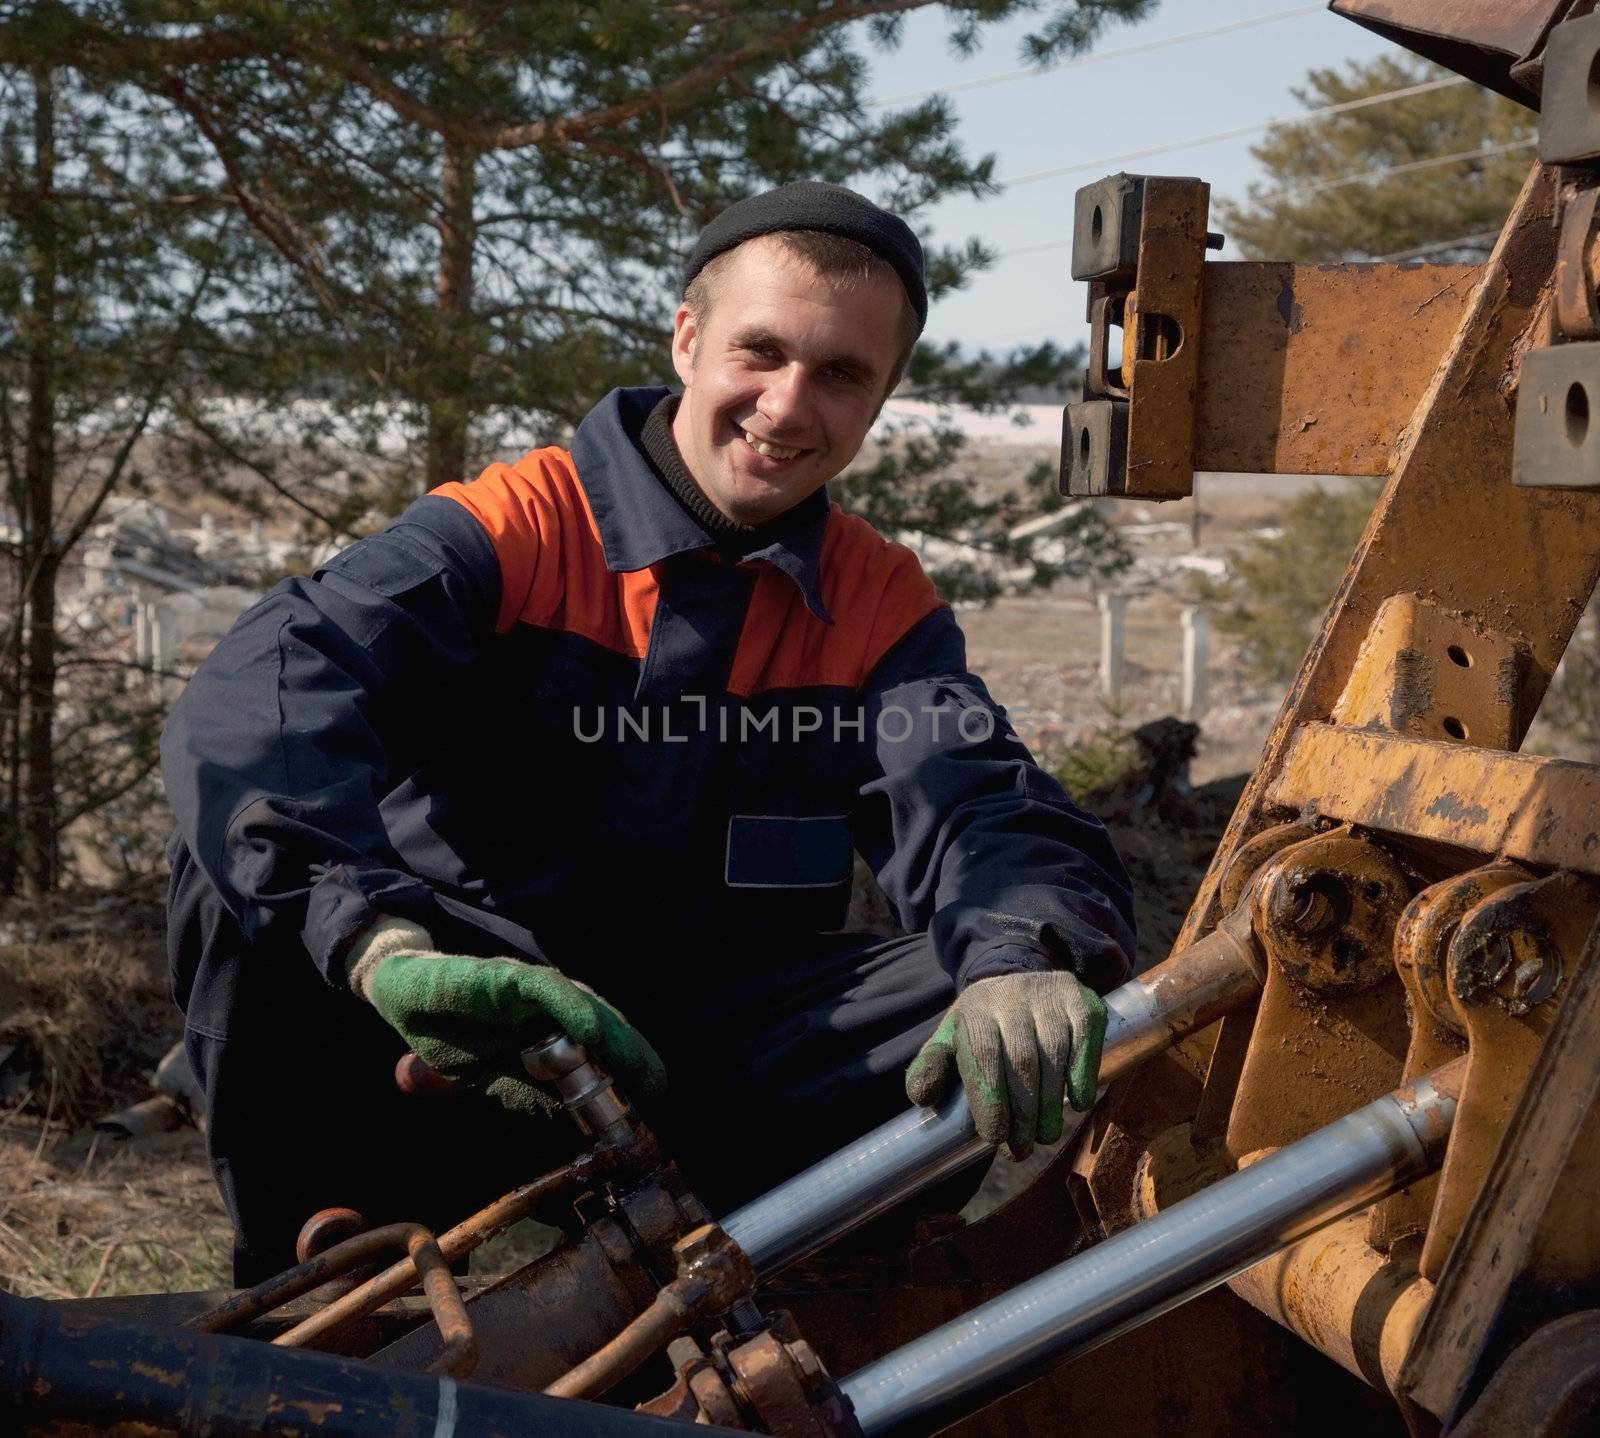 Machinist excavator with a wrench in his hand repairing a tractor